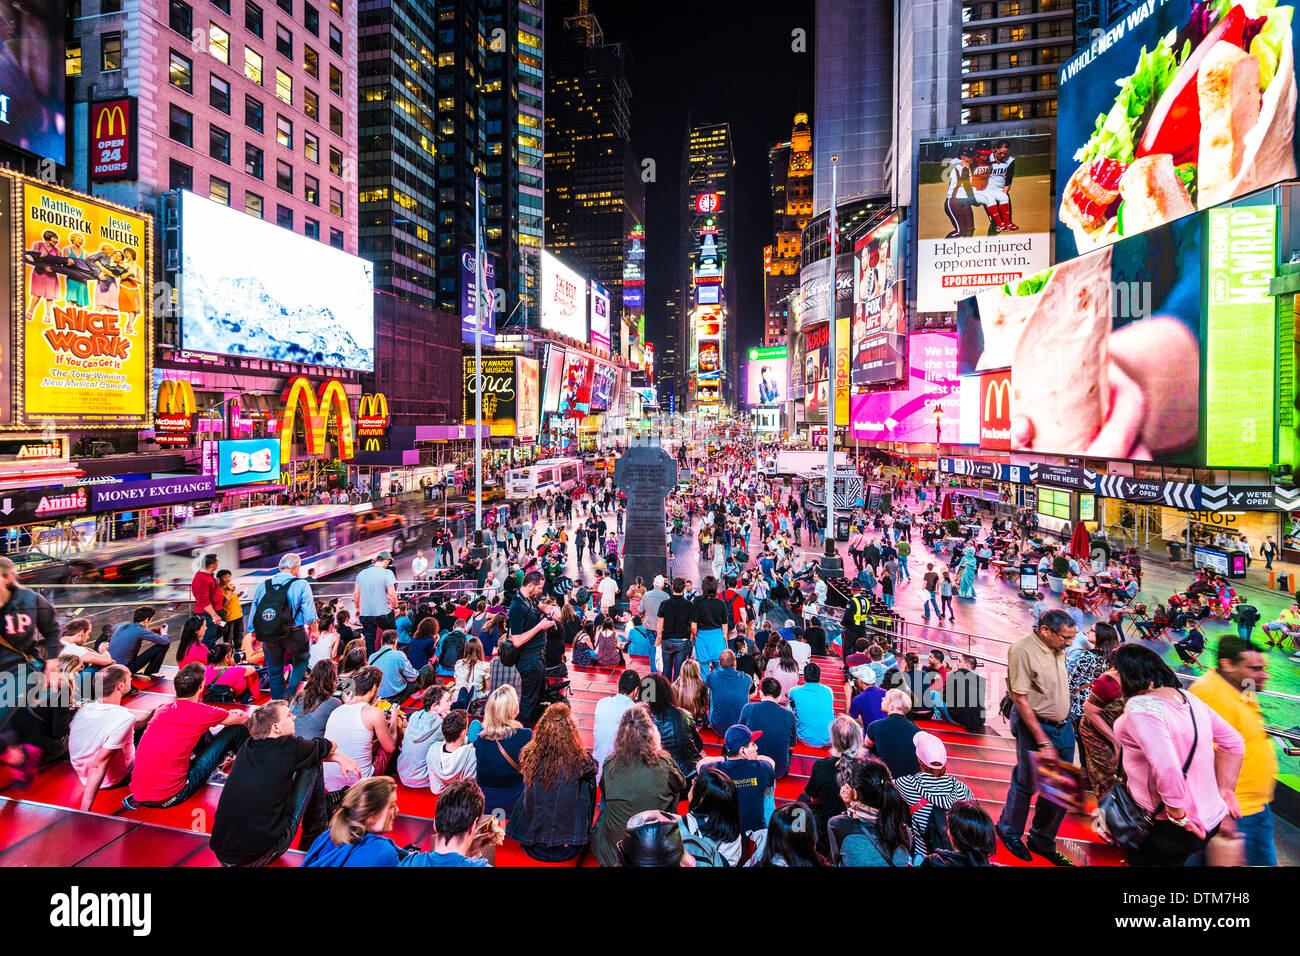 Crowds in Times Square, New York, New York, USA. Stock Photo